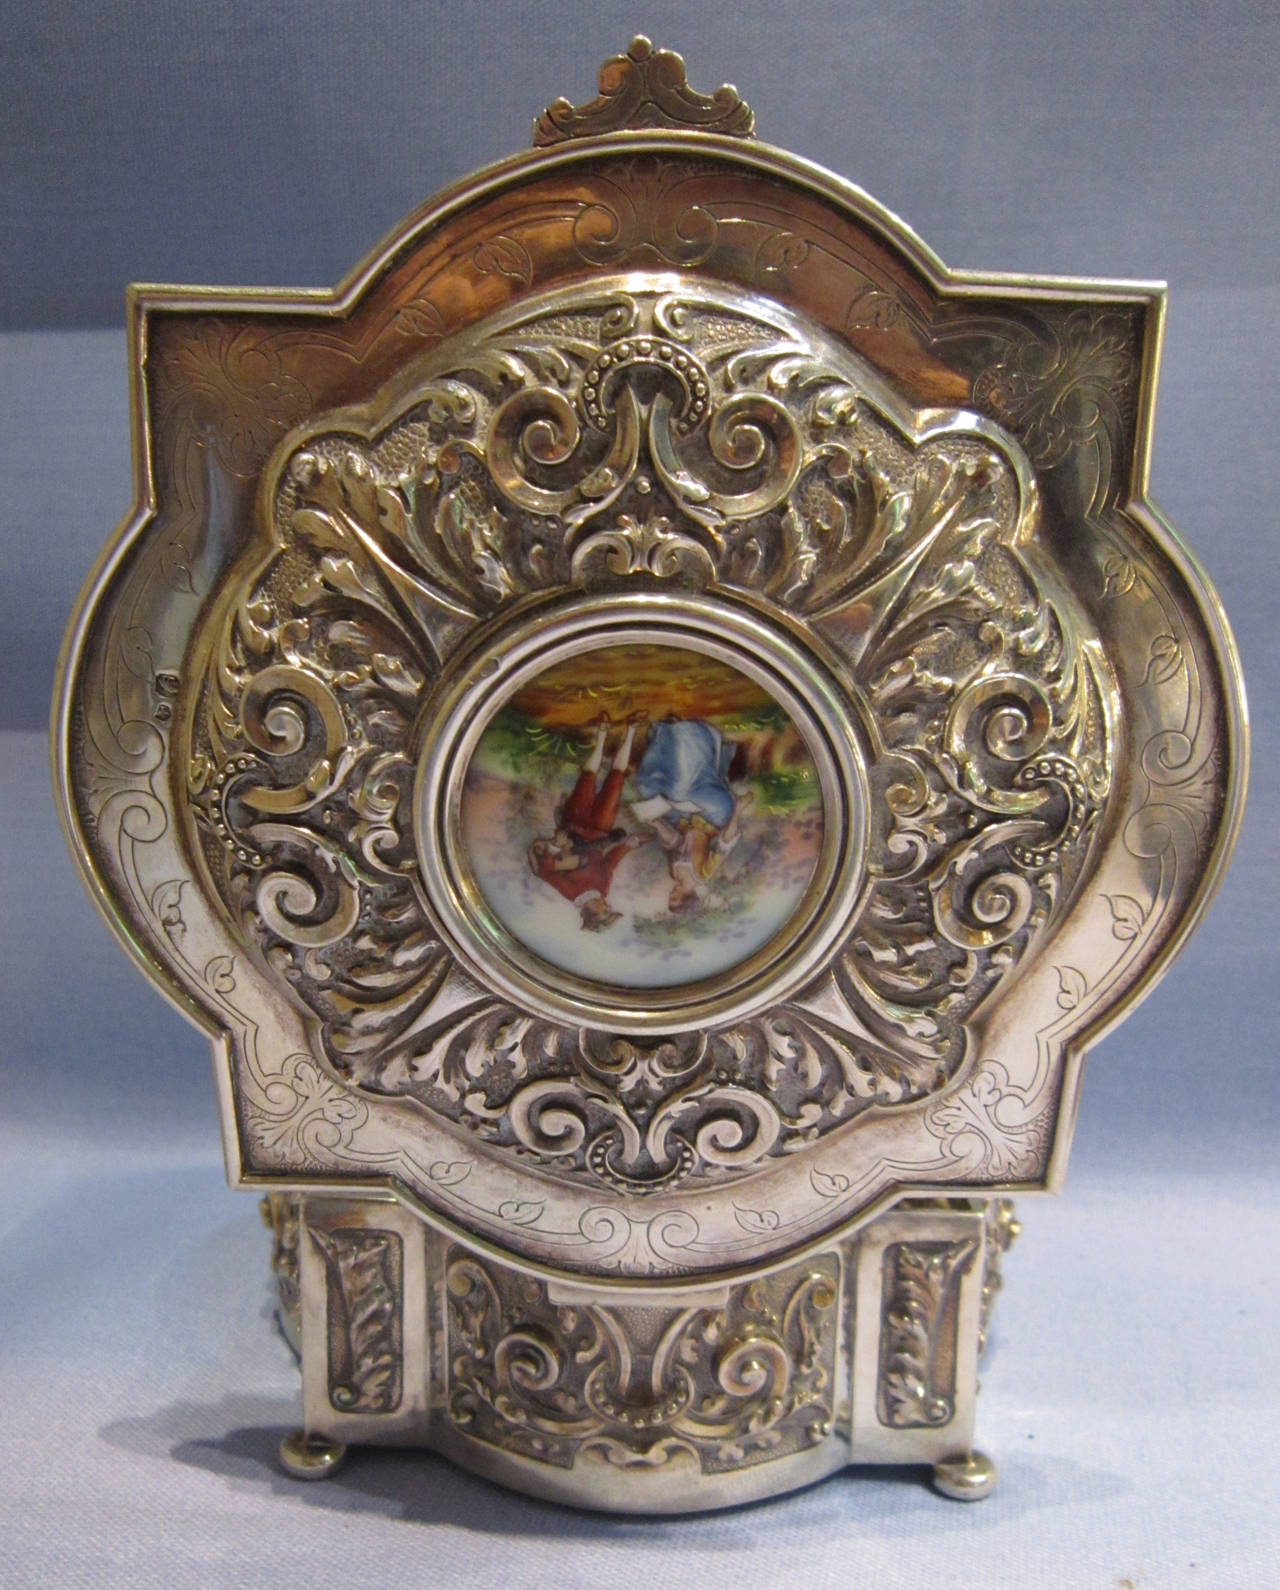 Repoussé Vintage Portuguese Silver Jewelry Casket, Signed, Chased and Repousse